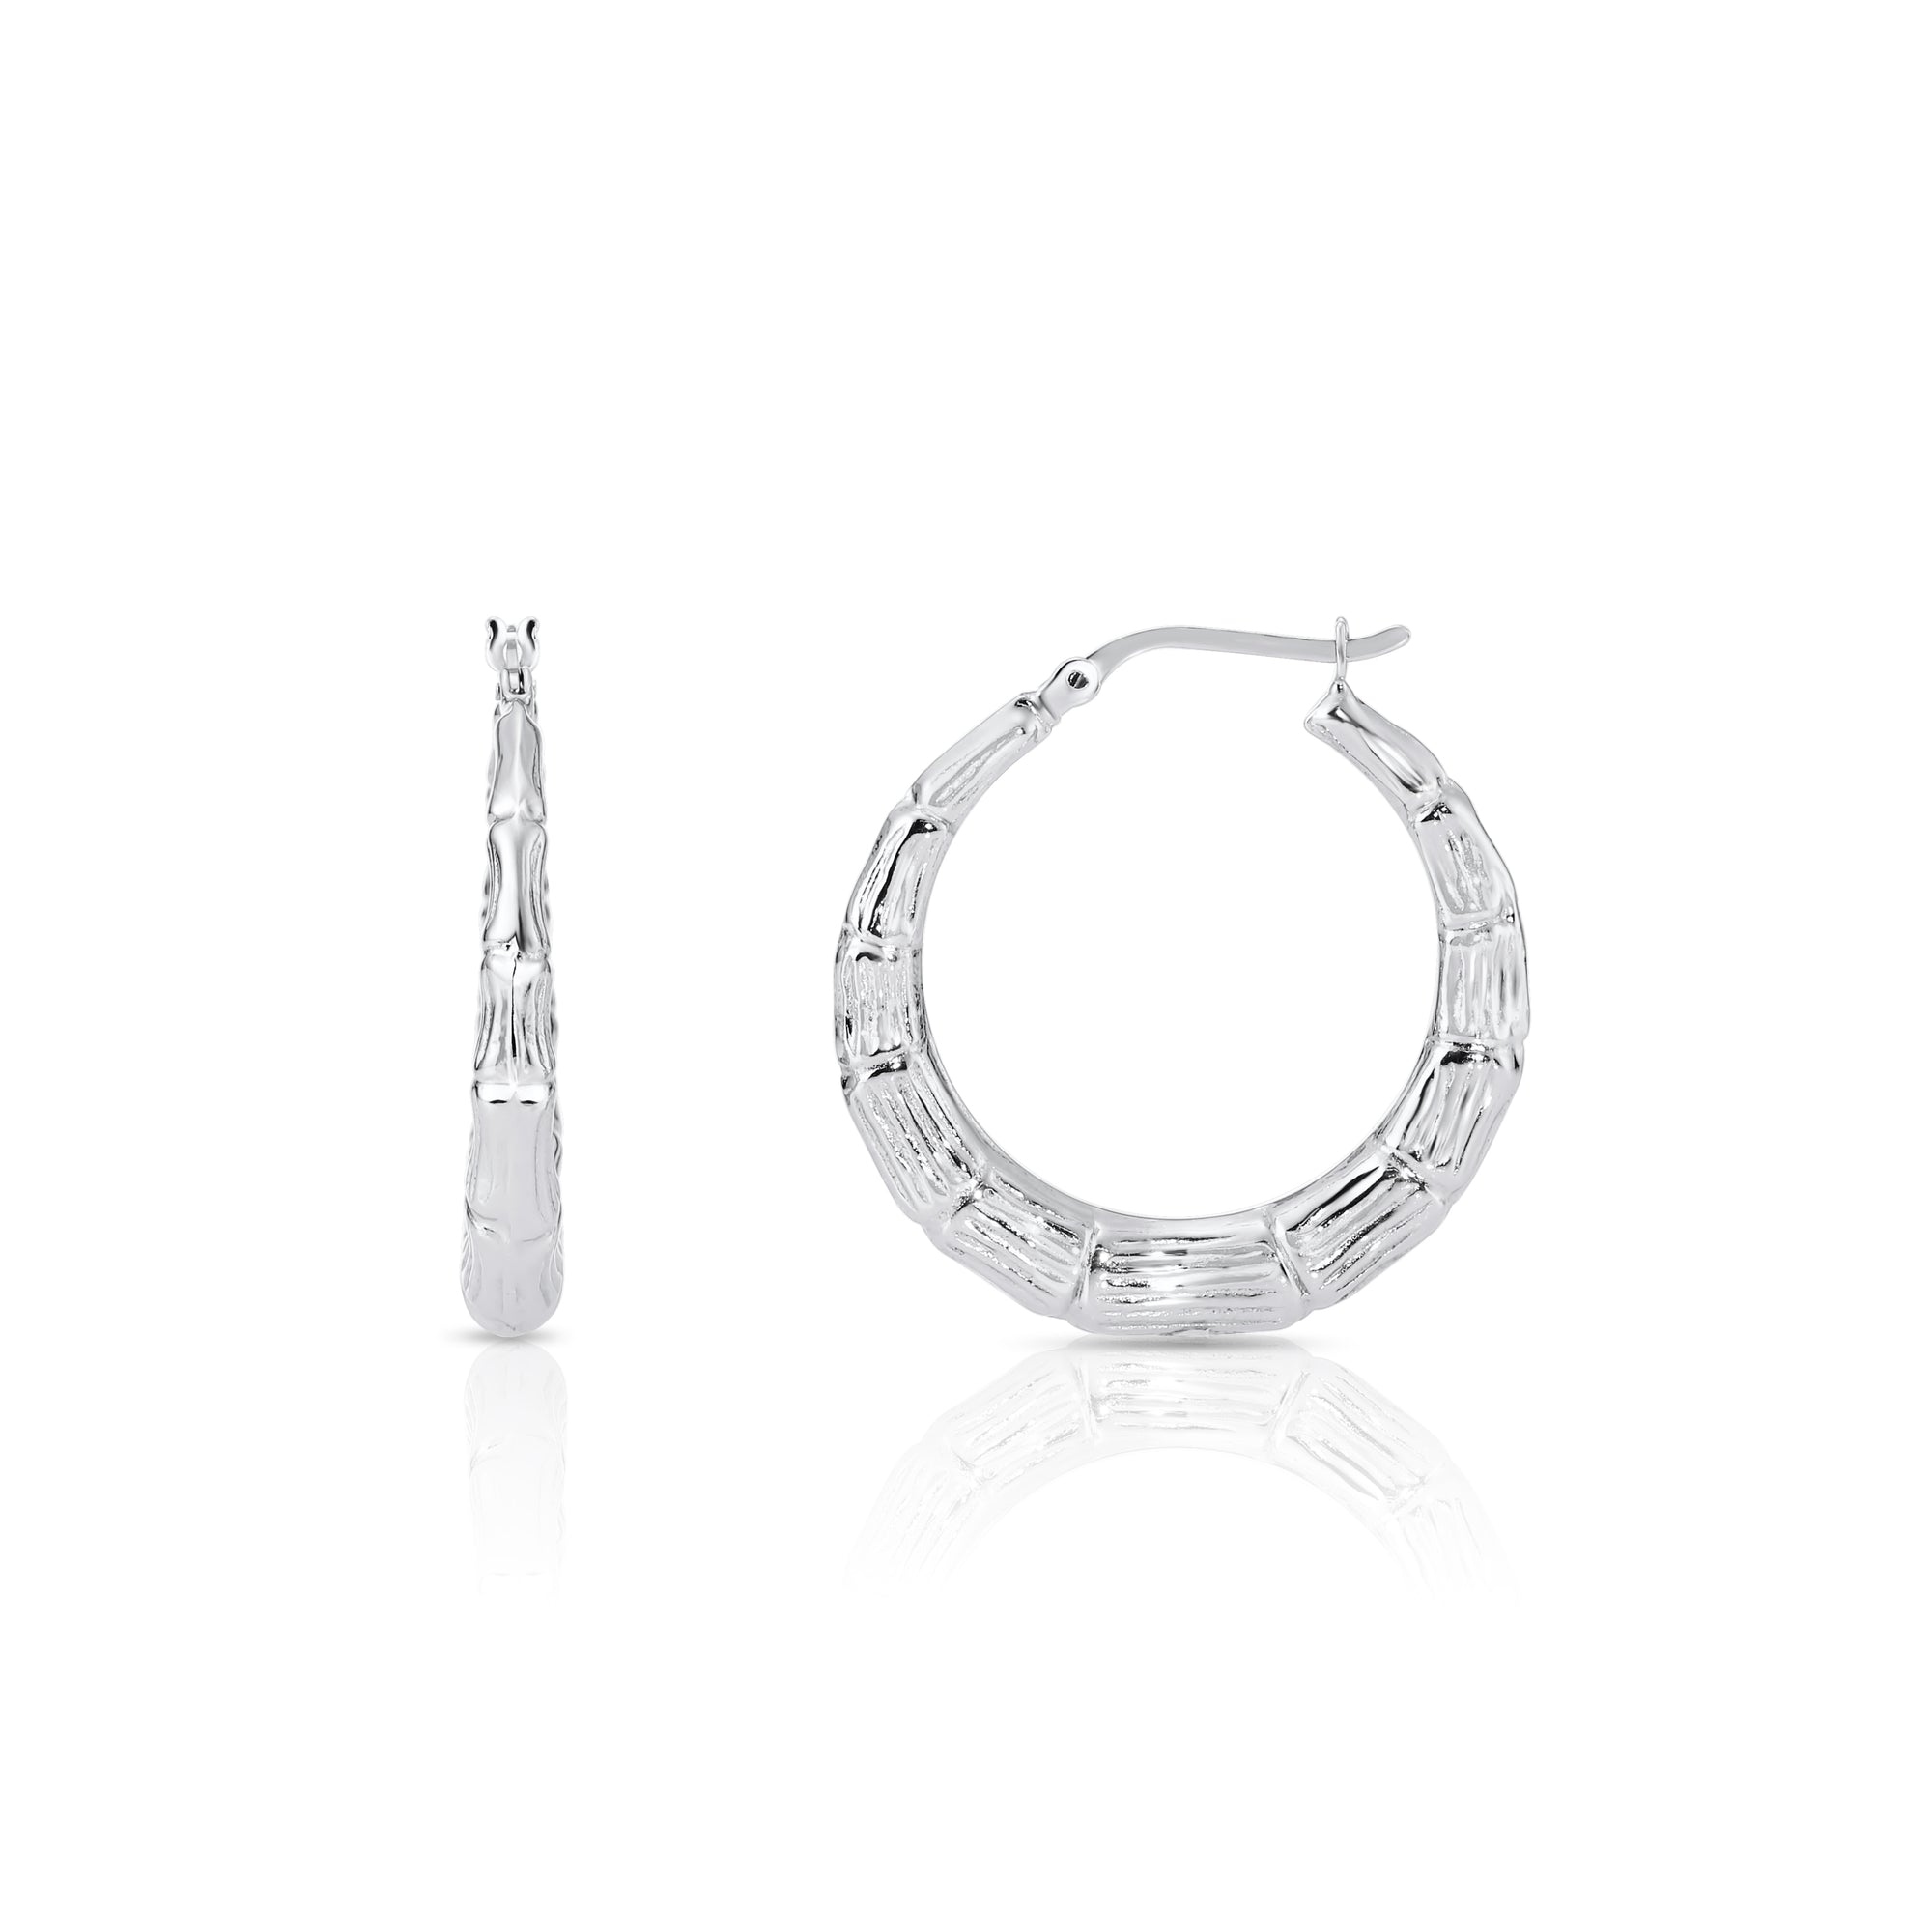 Bamboo Texture Round Hoop Earrings in Sterling Silver